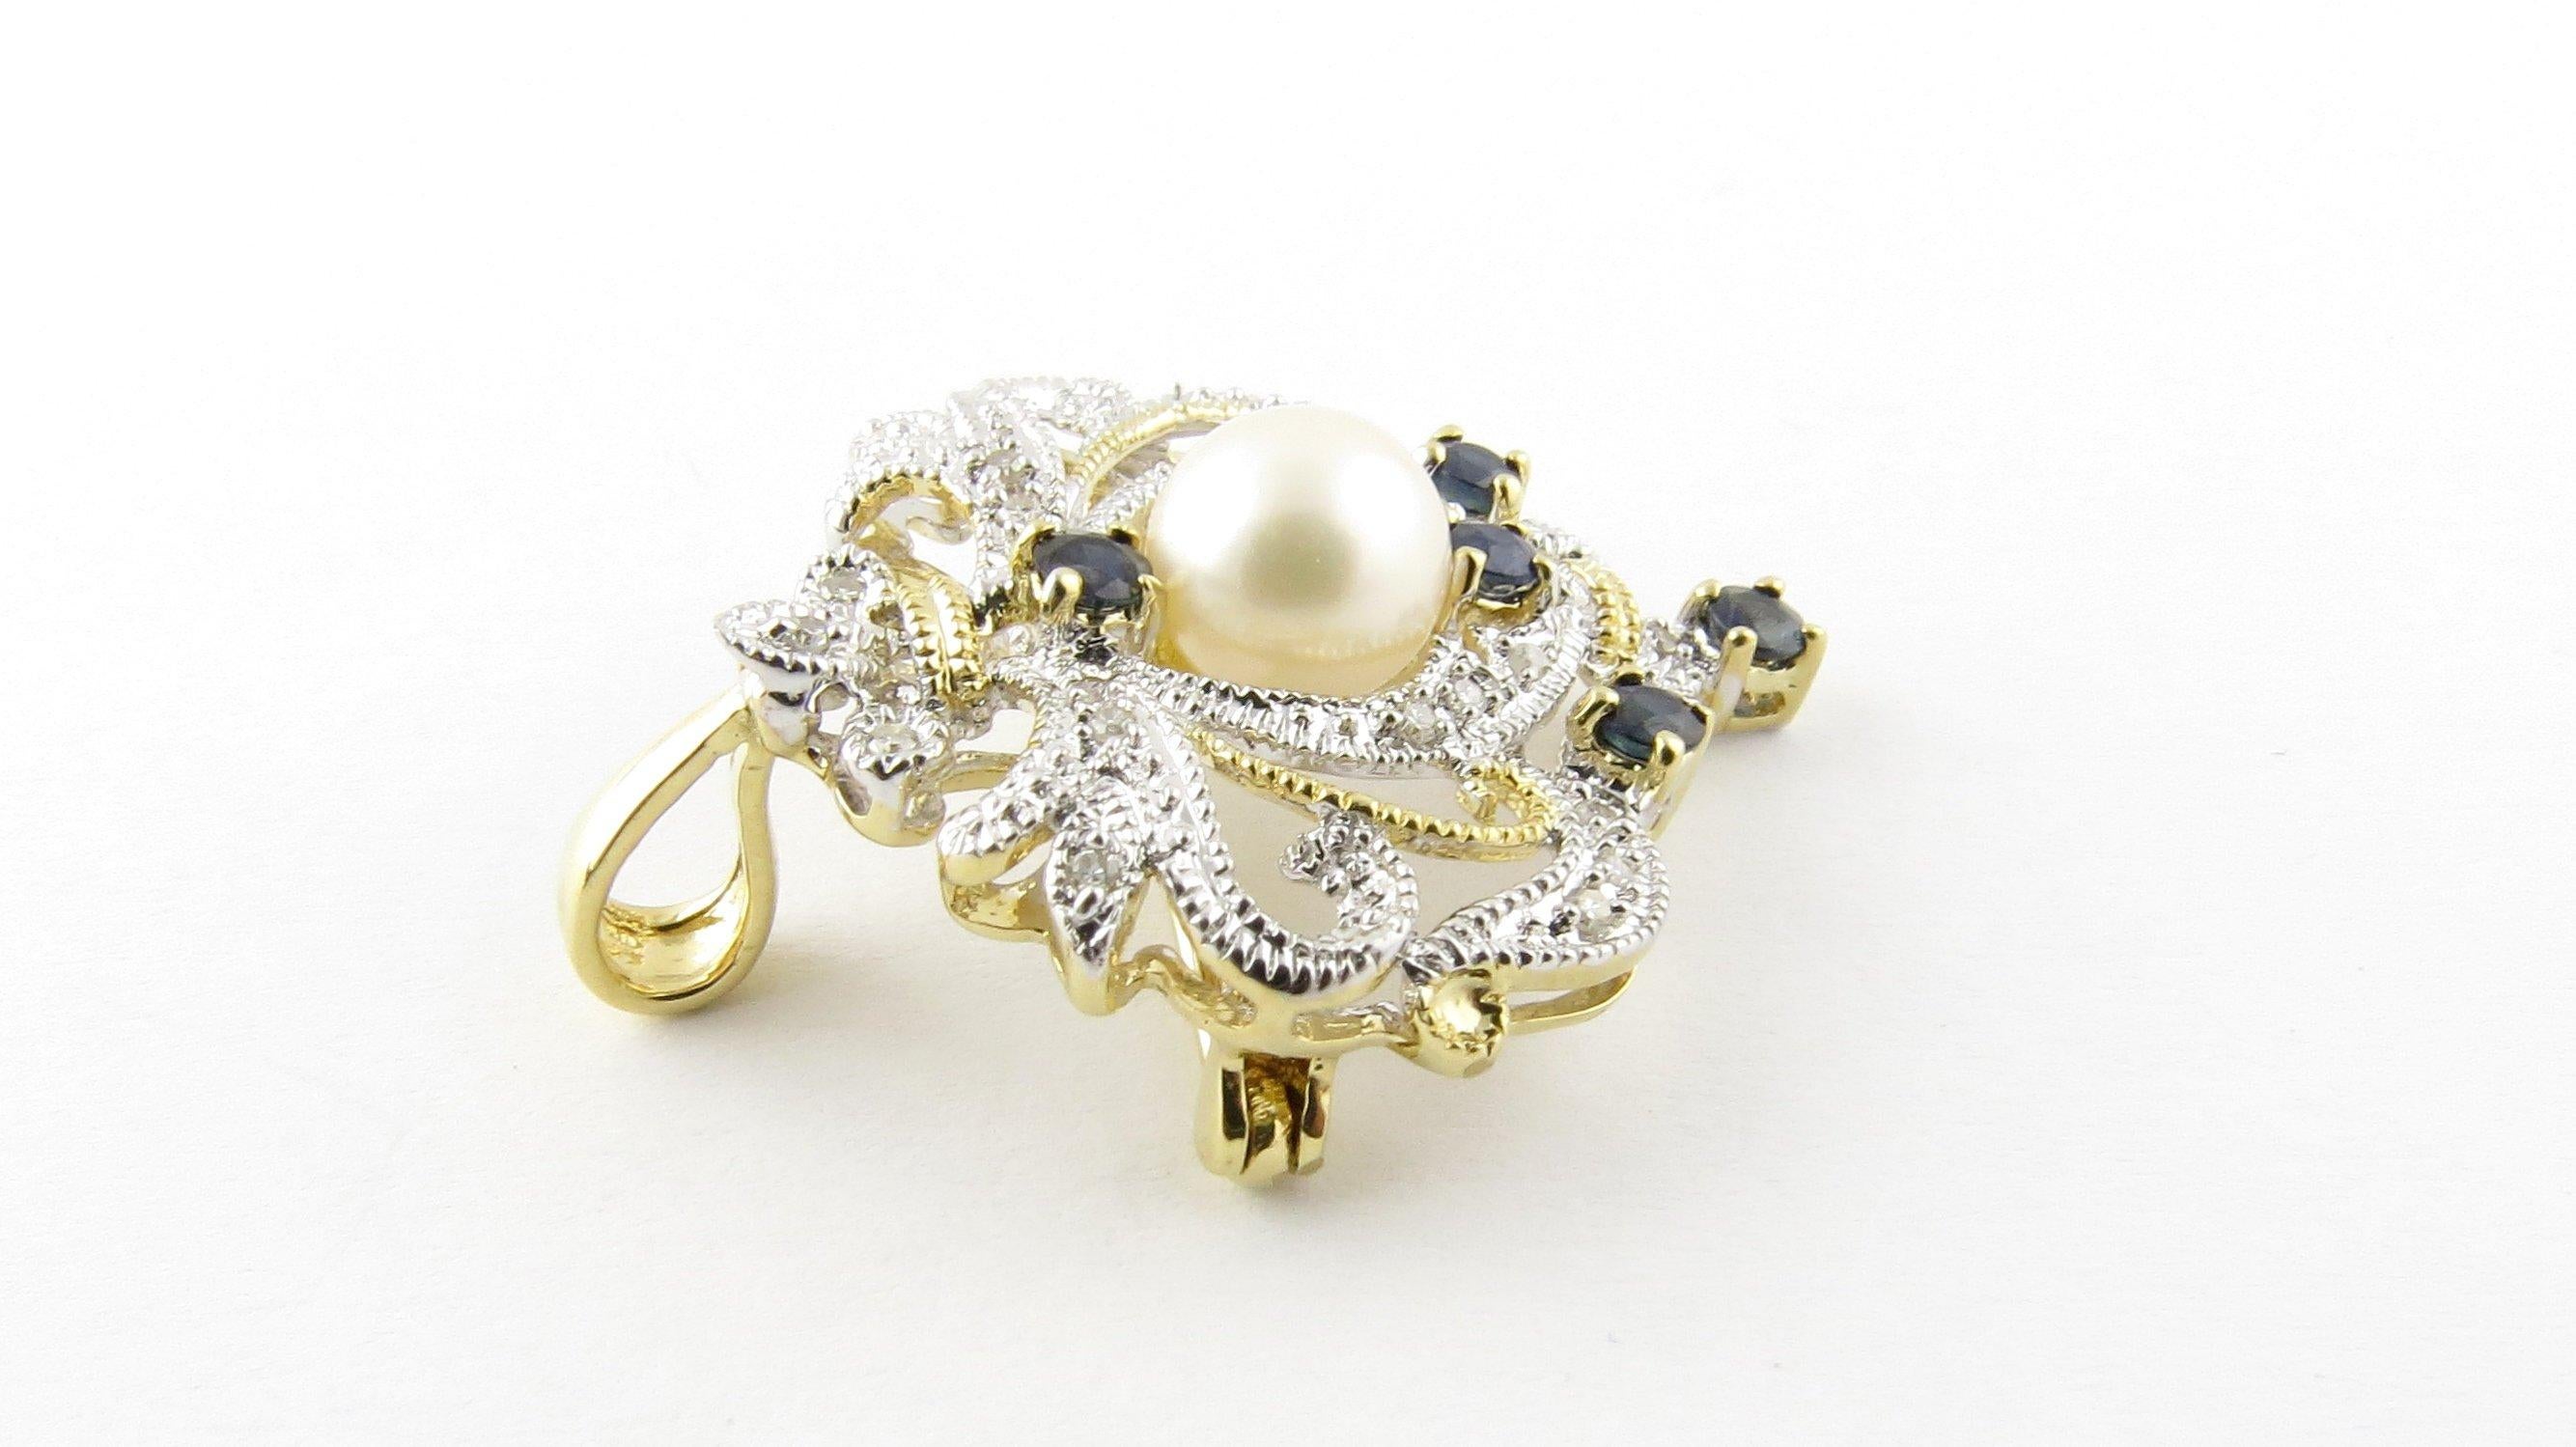 Women's 14 Karat White and Yellow Gold Diamond, Sapphire and Pearl Brooch or Pendant